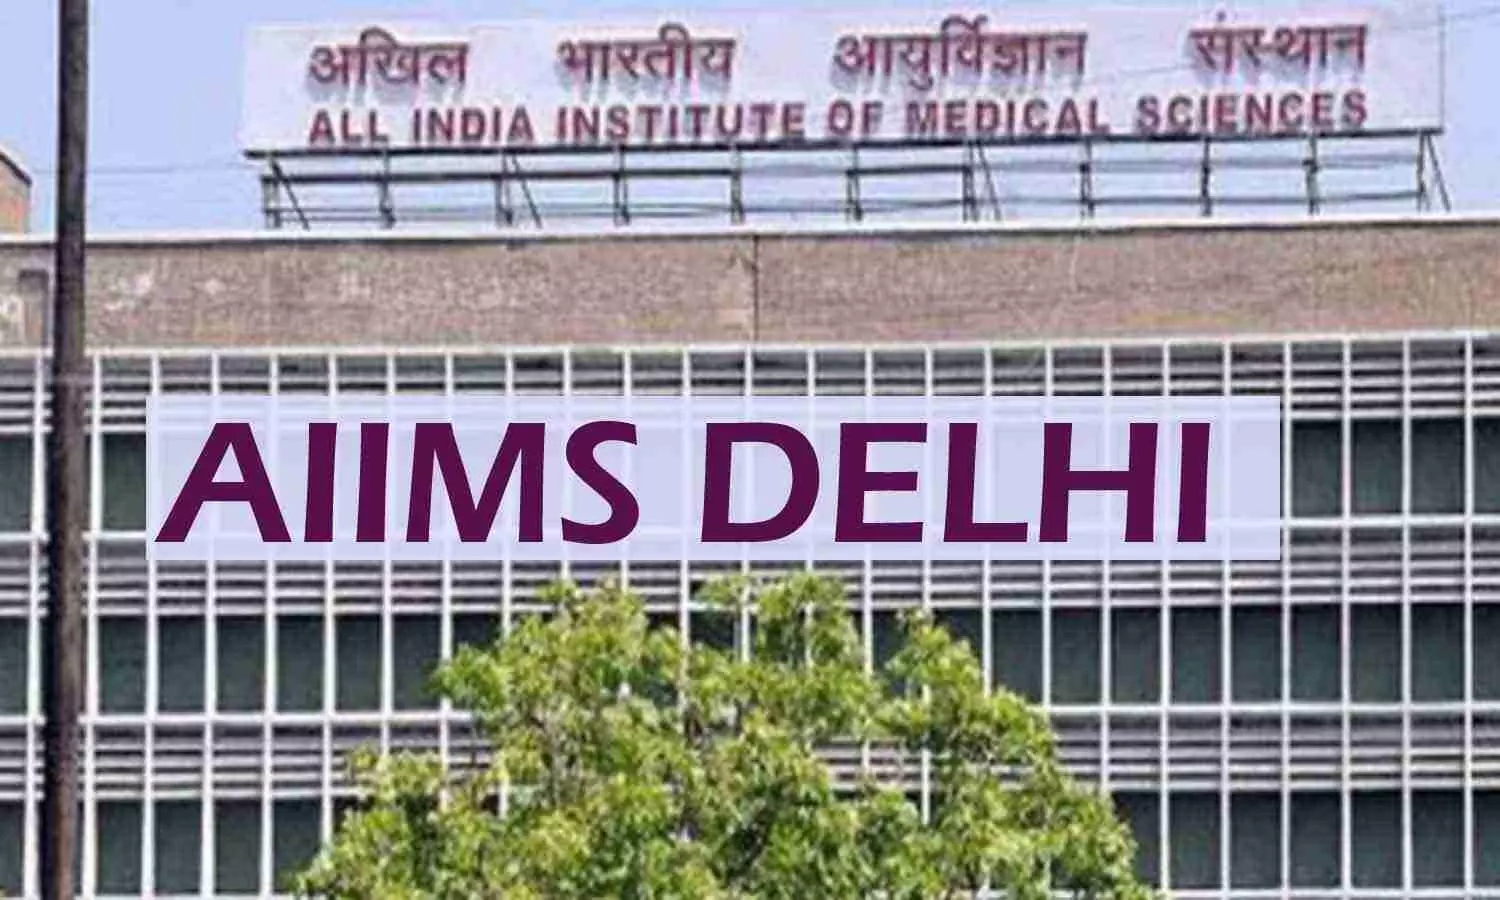 AIIMS Delhi told to pay Rs 50 lakh to illegally terminated employee